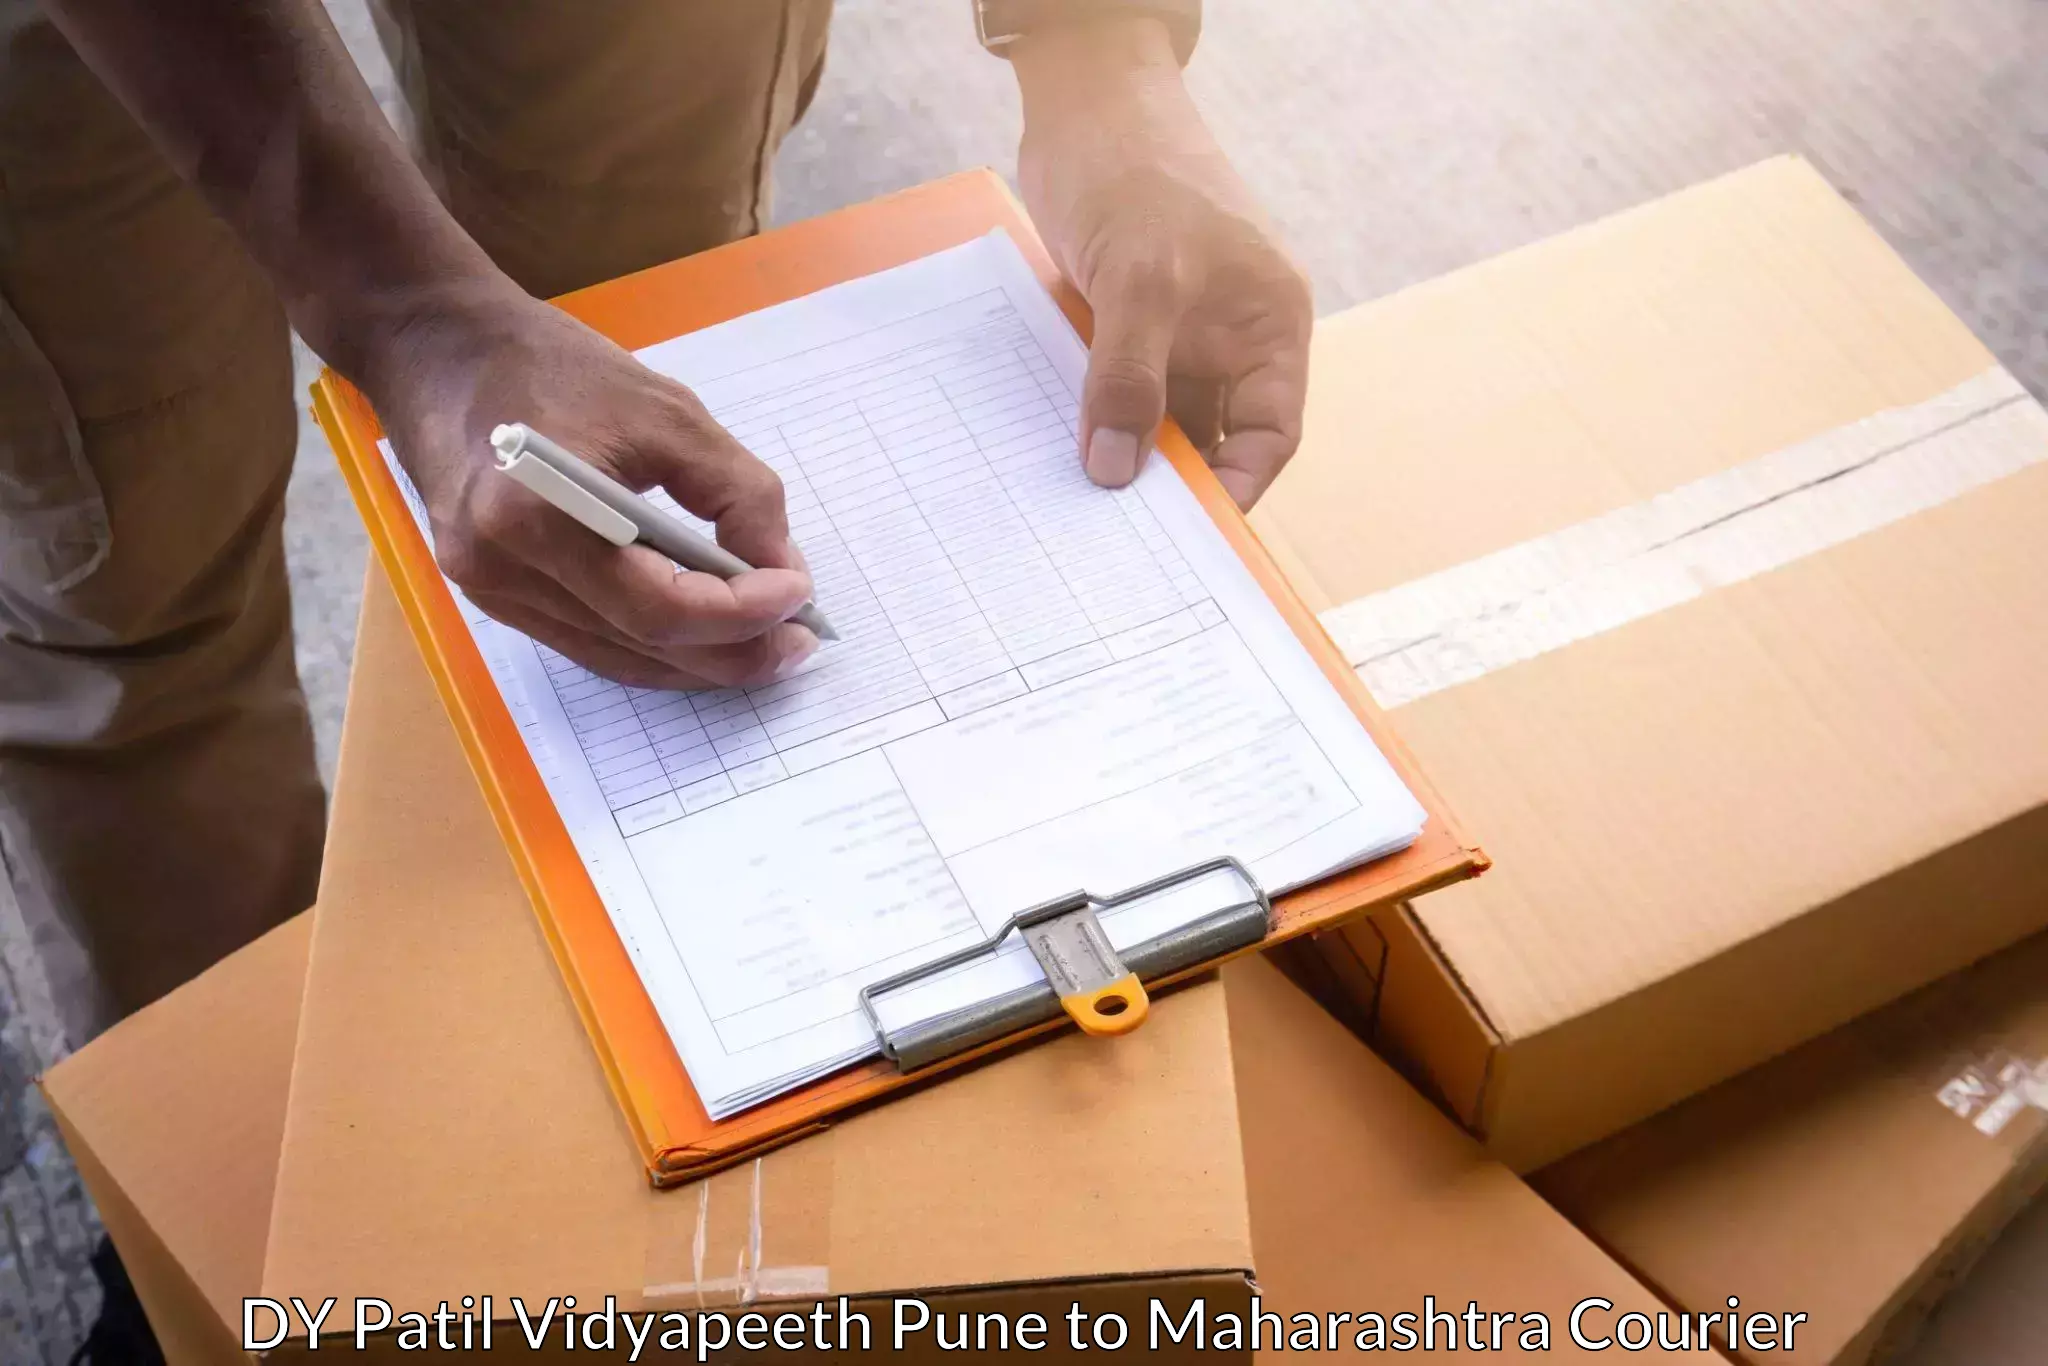 Supply chain delivery DY Patil Vidyapeeth Pune to Dongarkinhi